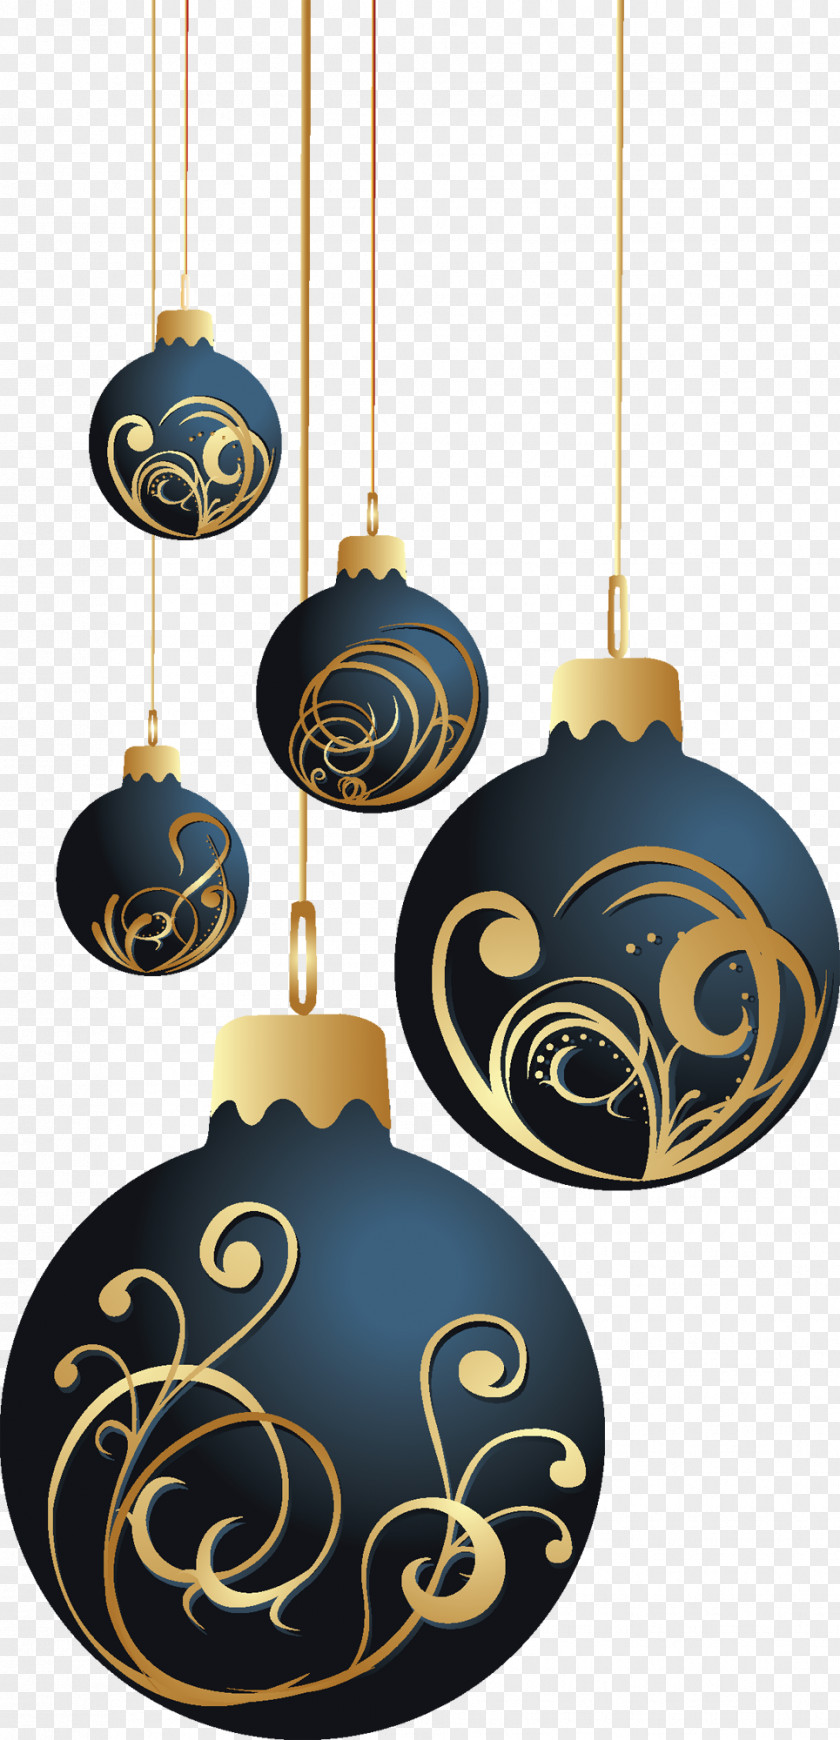 Class Of 2018 Christmas Ornament Clip Art PNG